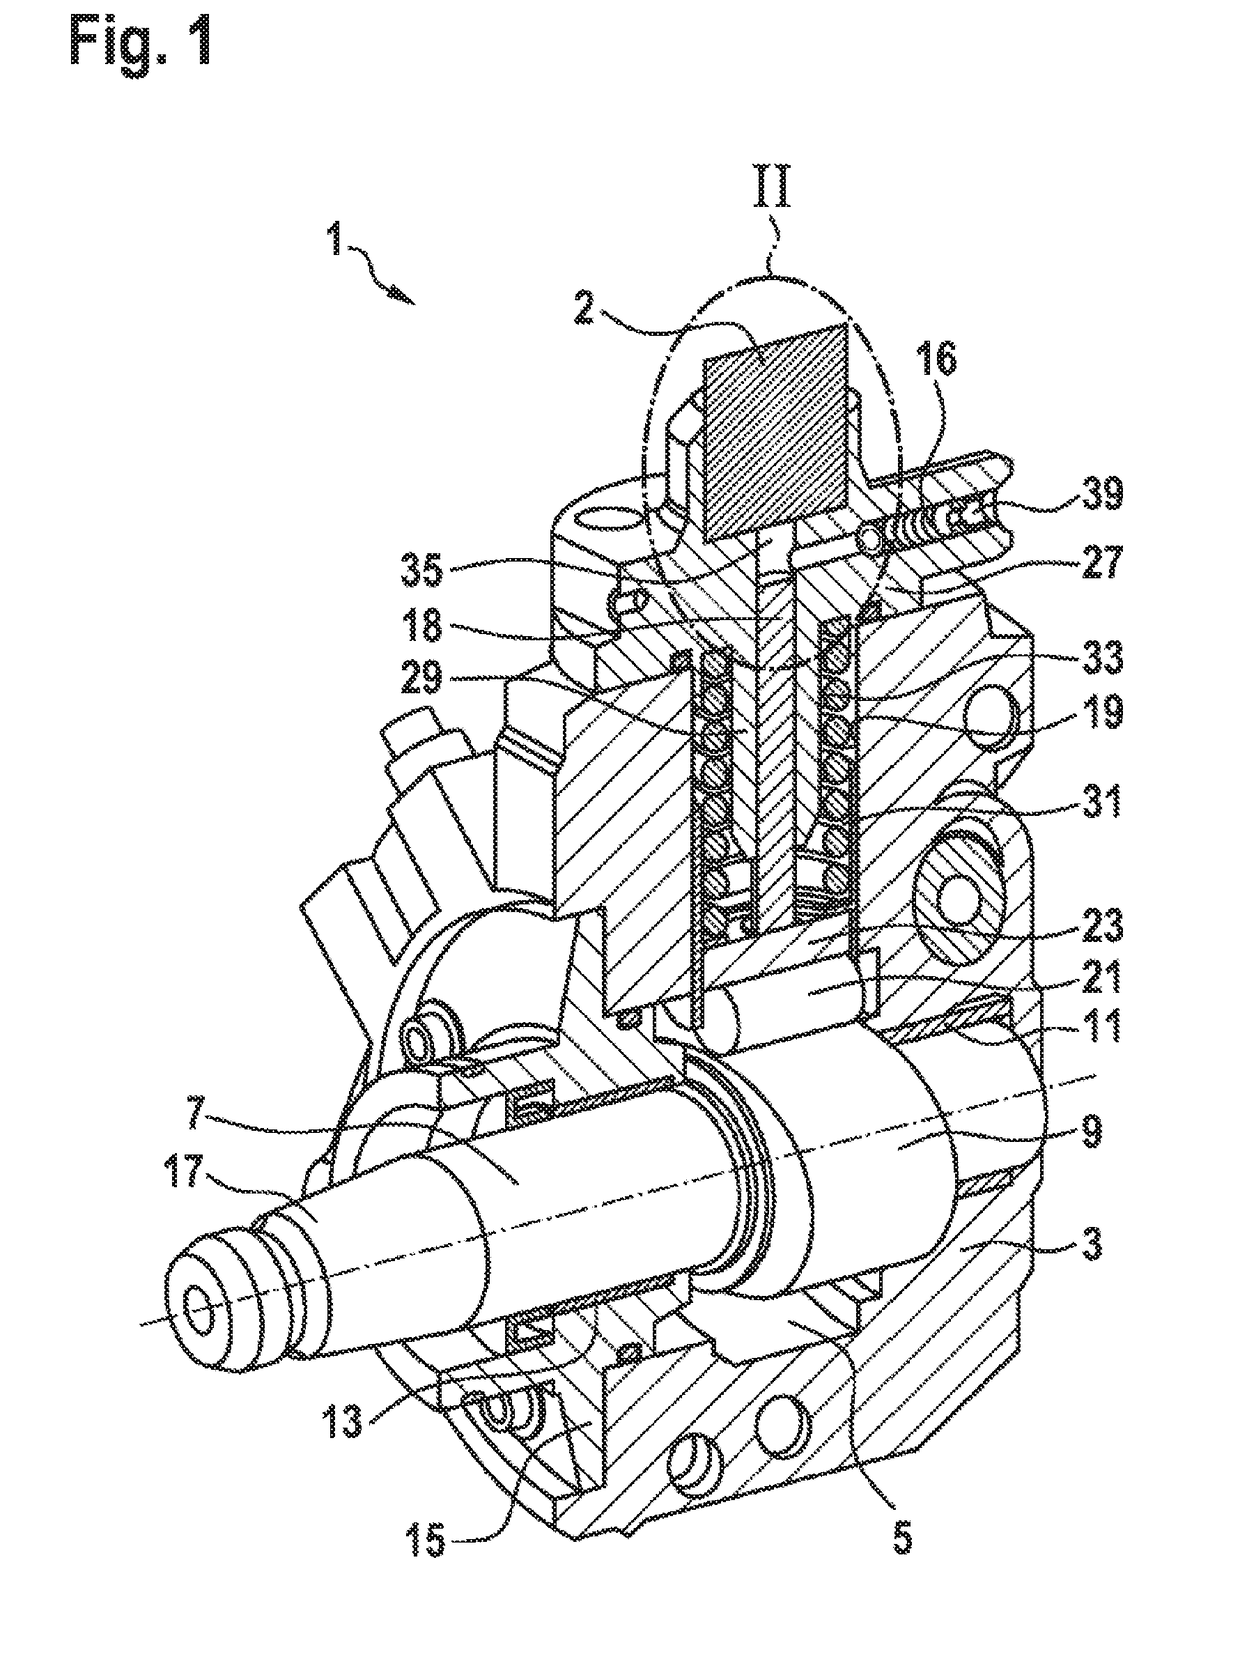 Valve, In Particular A Suction Valve, In A High-Pressure Pump of A Fuel Injection System